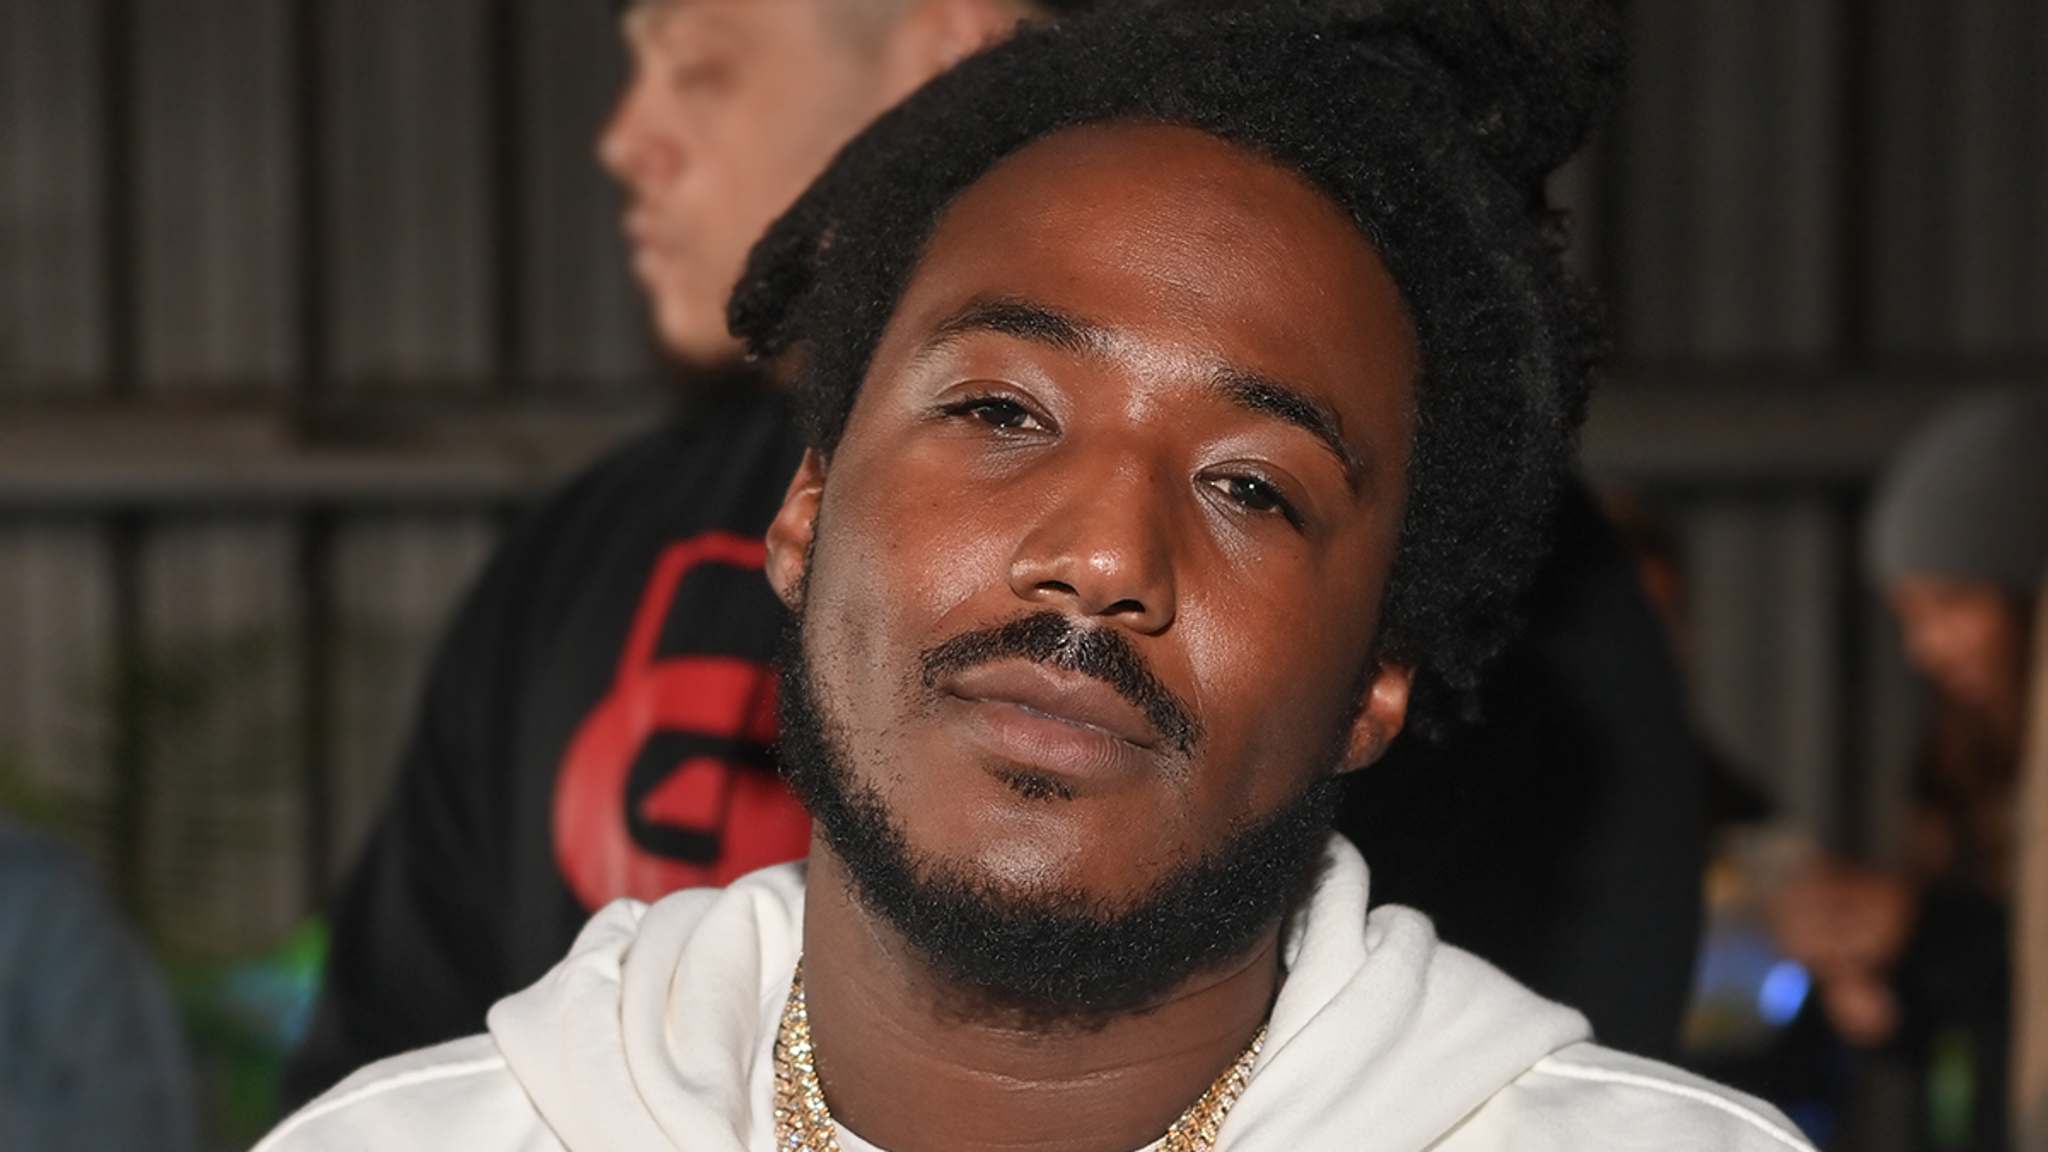 Seven Shot at After-Party Attended by Rapper Mozzy, He Gets Detained